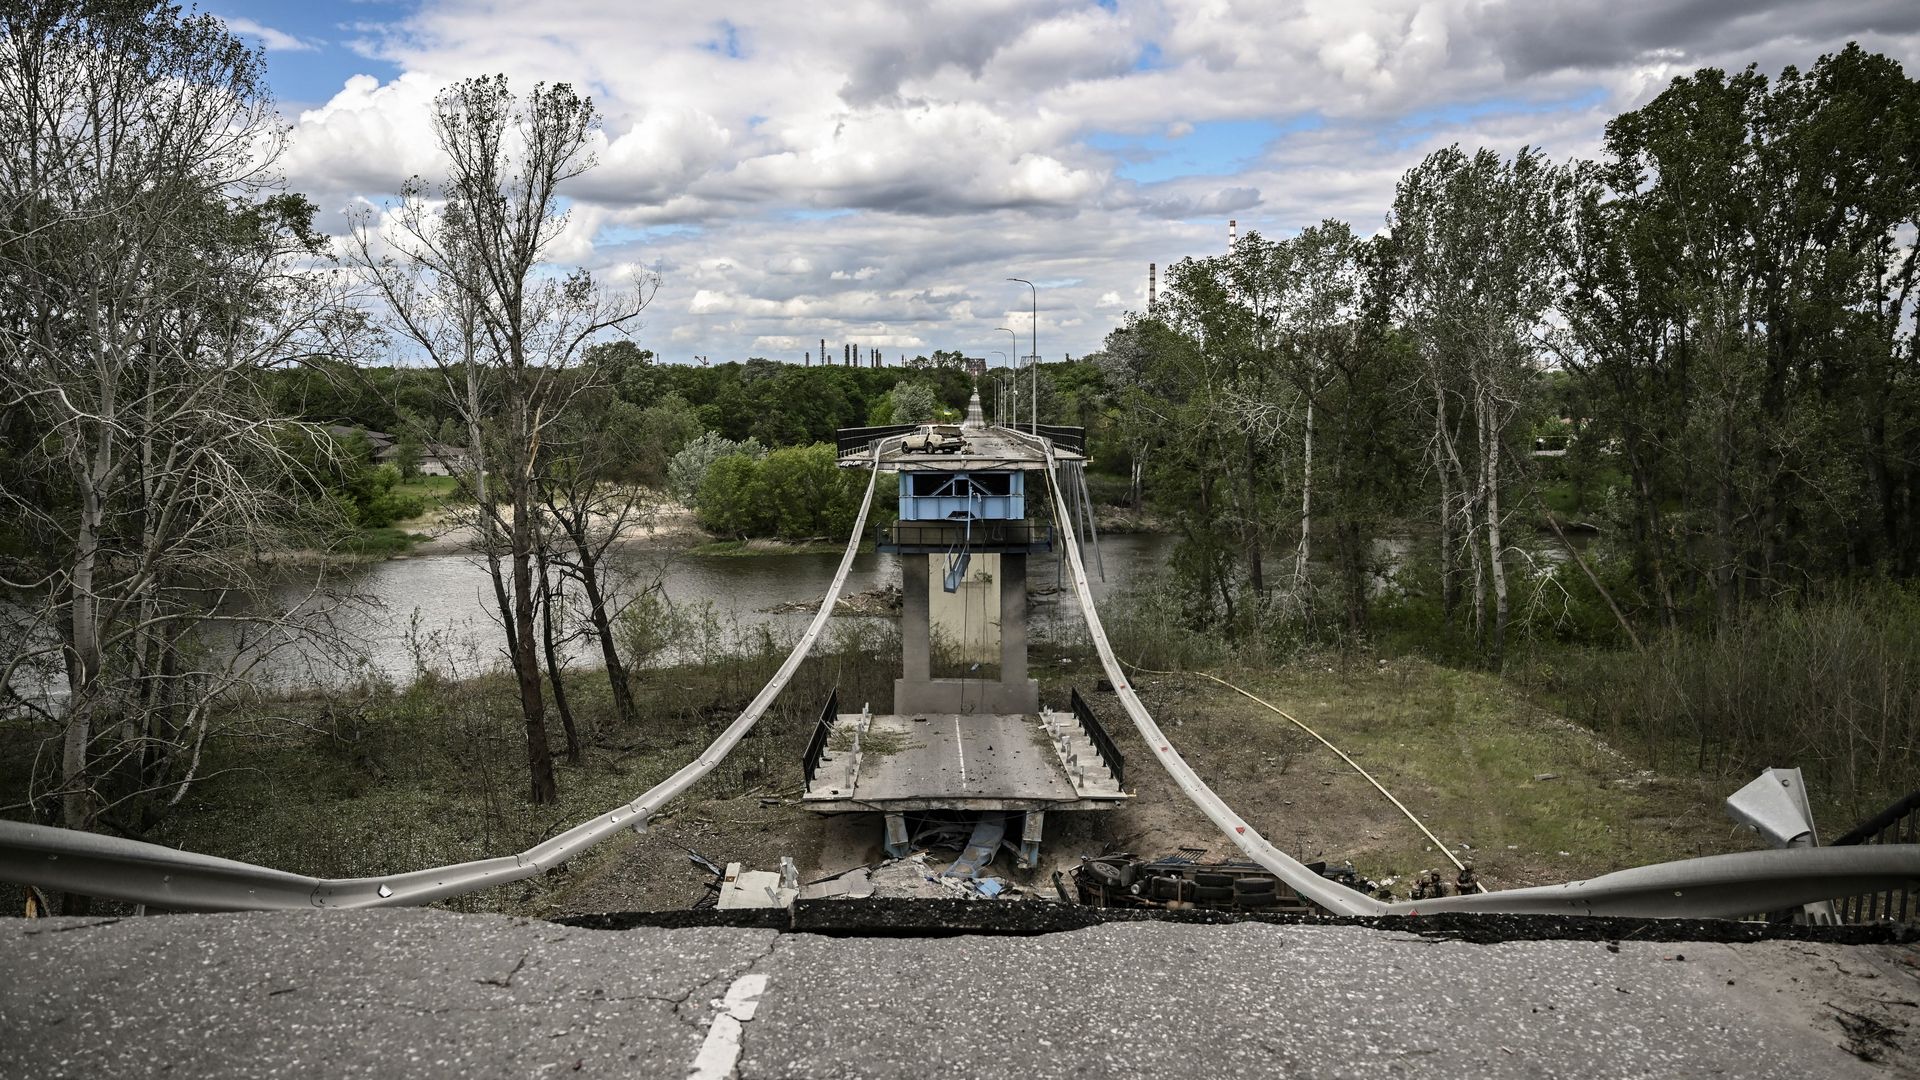 A picture taken on May 22, 2022, shows the destroyed bridge connecting the city of Lysychansk with the city of Severodonetsk in the eastern Ukranian region of Donbas.